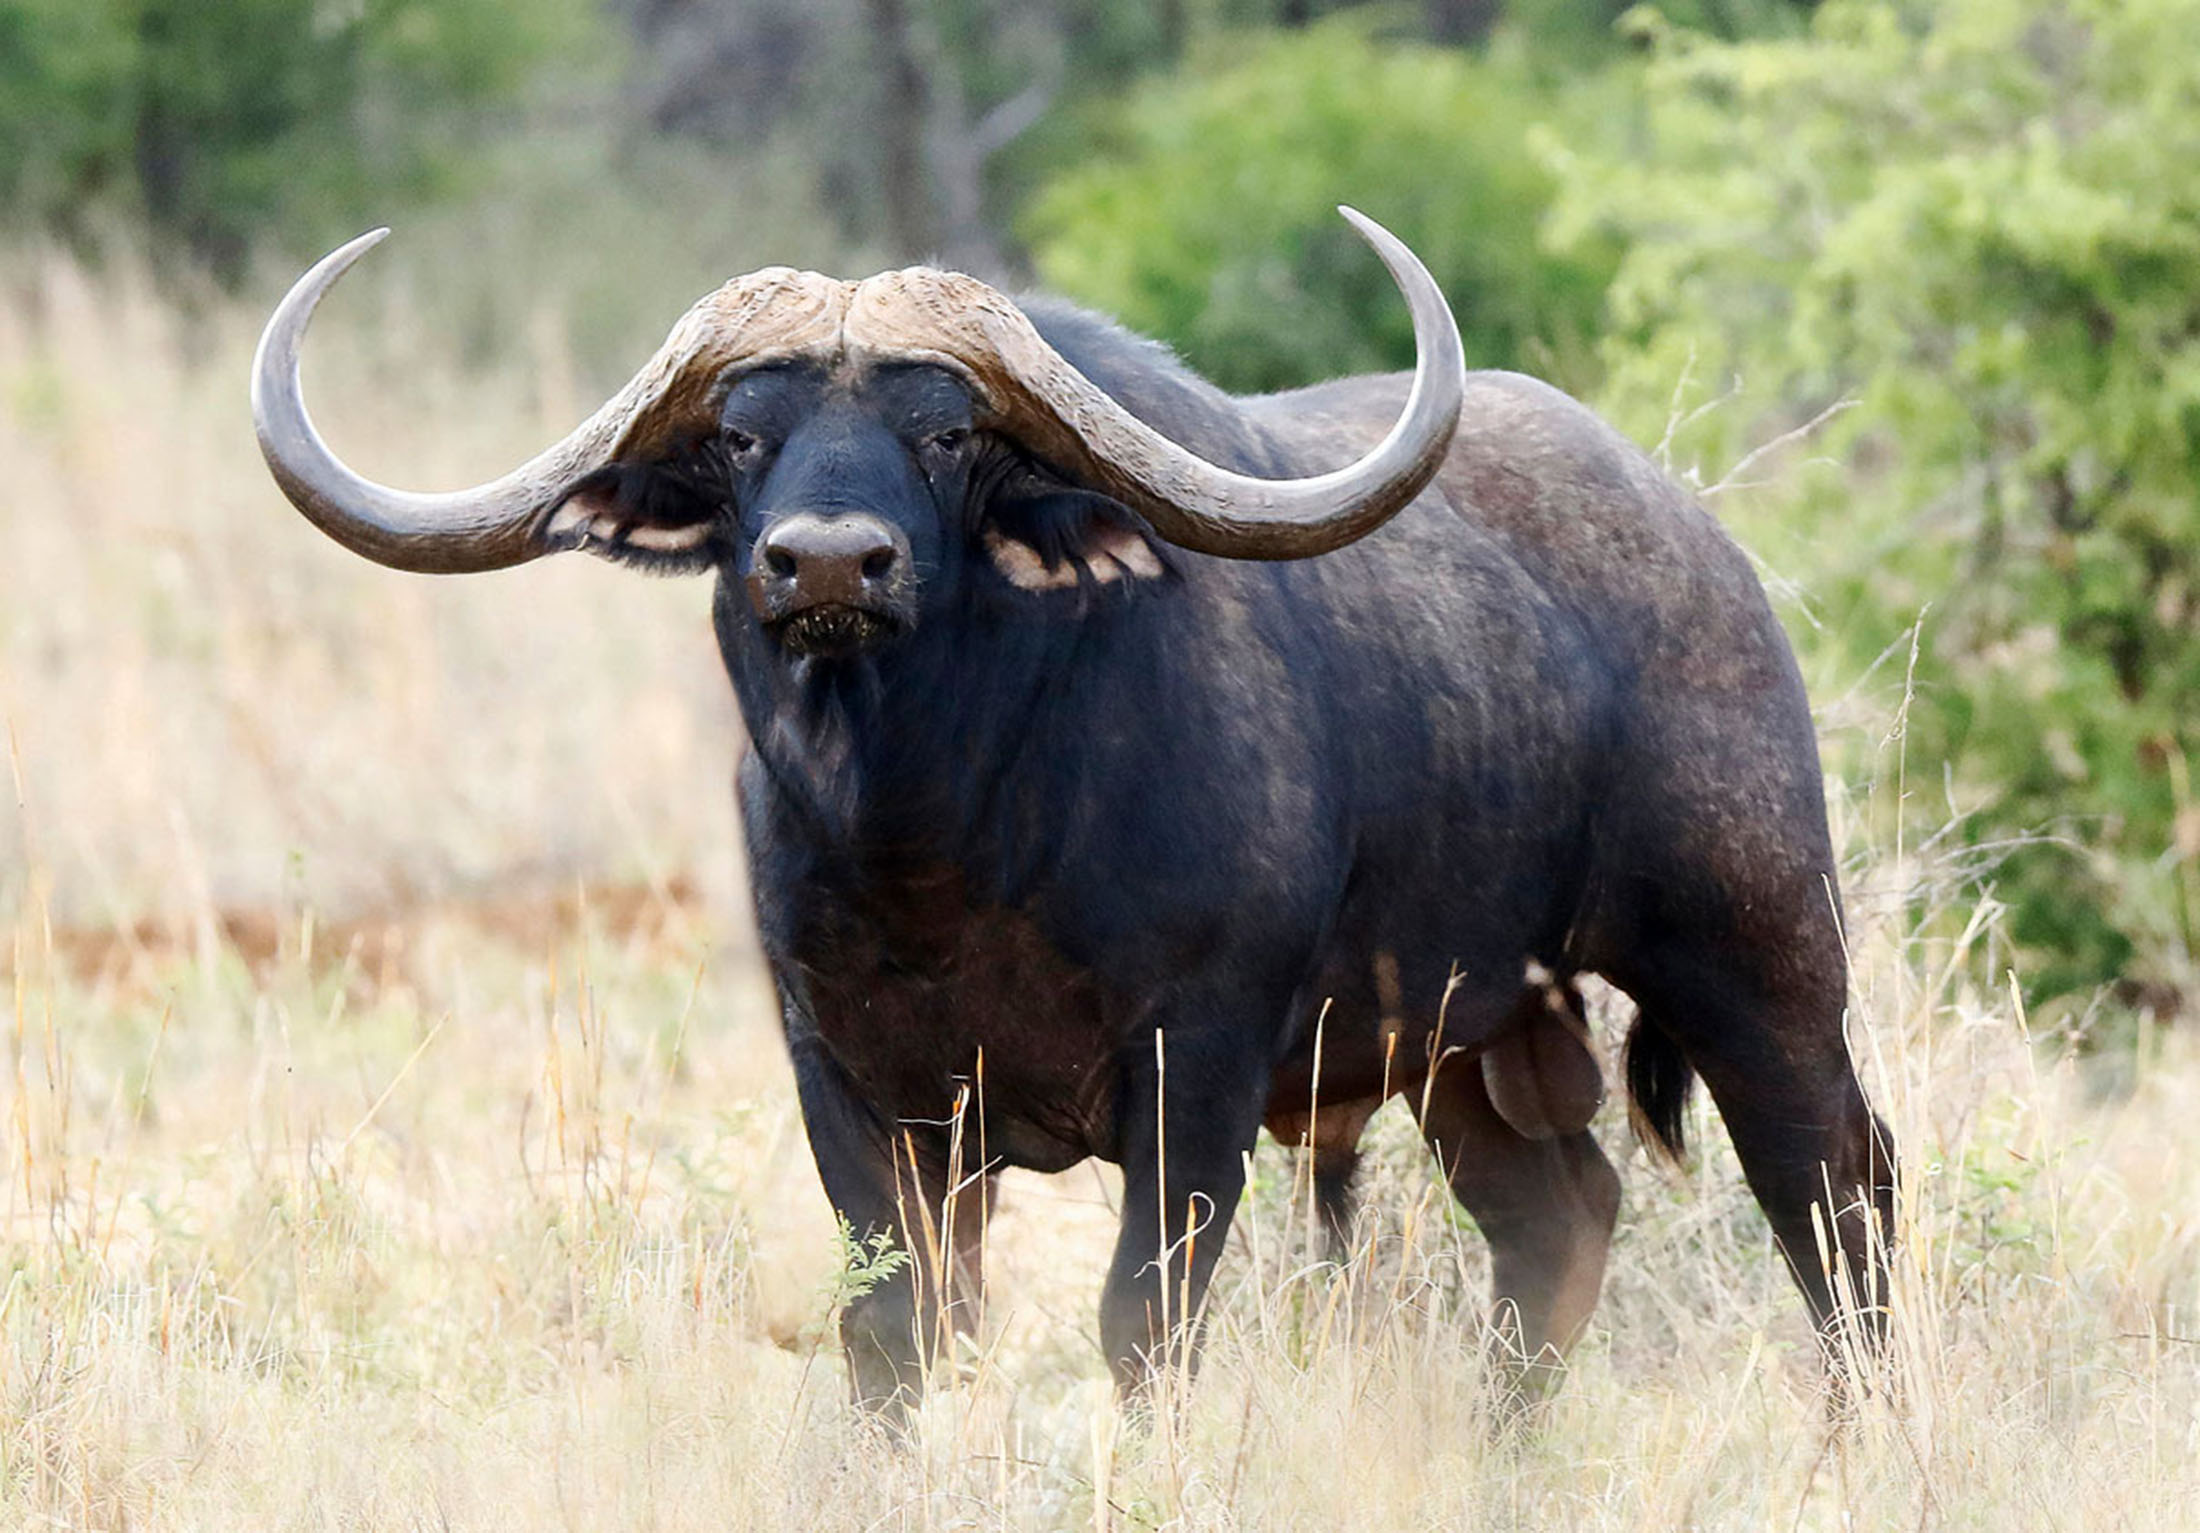 World's Most Expensive African Buffalo Valued at $11.1 Million - Bloomberg